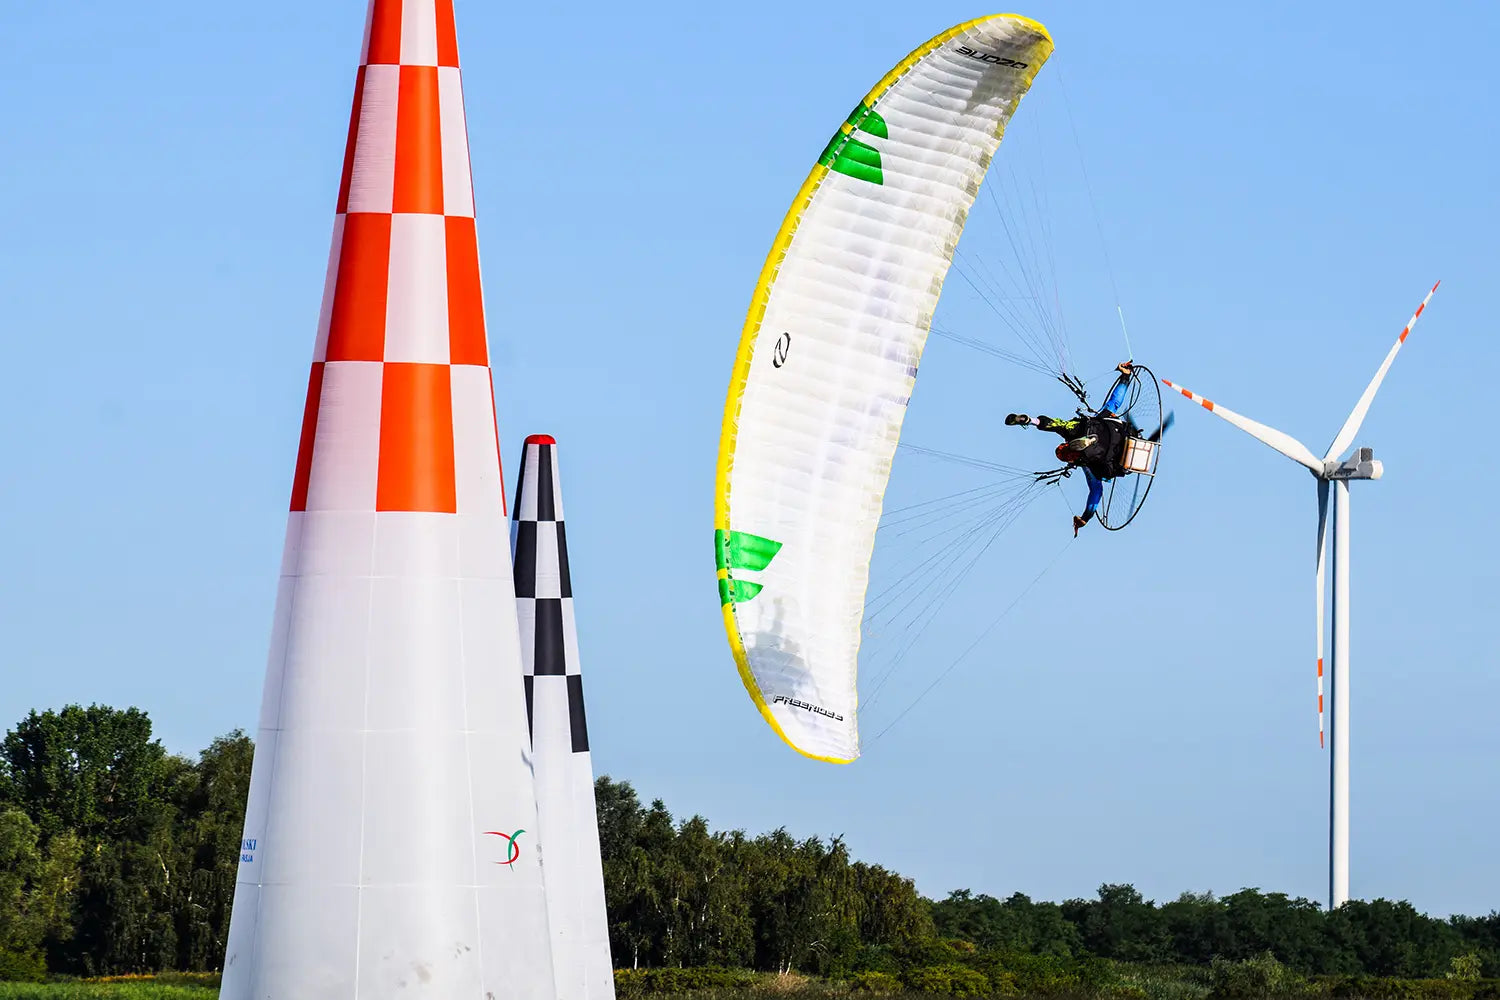 The Ozone Freeride 2: A High-Performance Wing for Dynamic Pilots